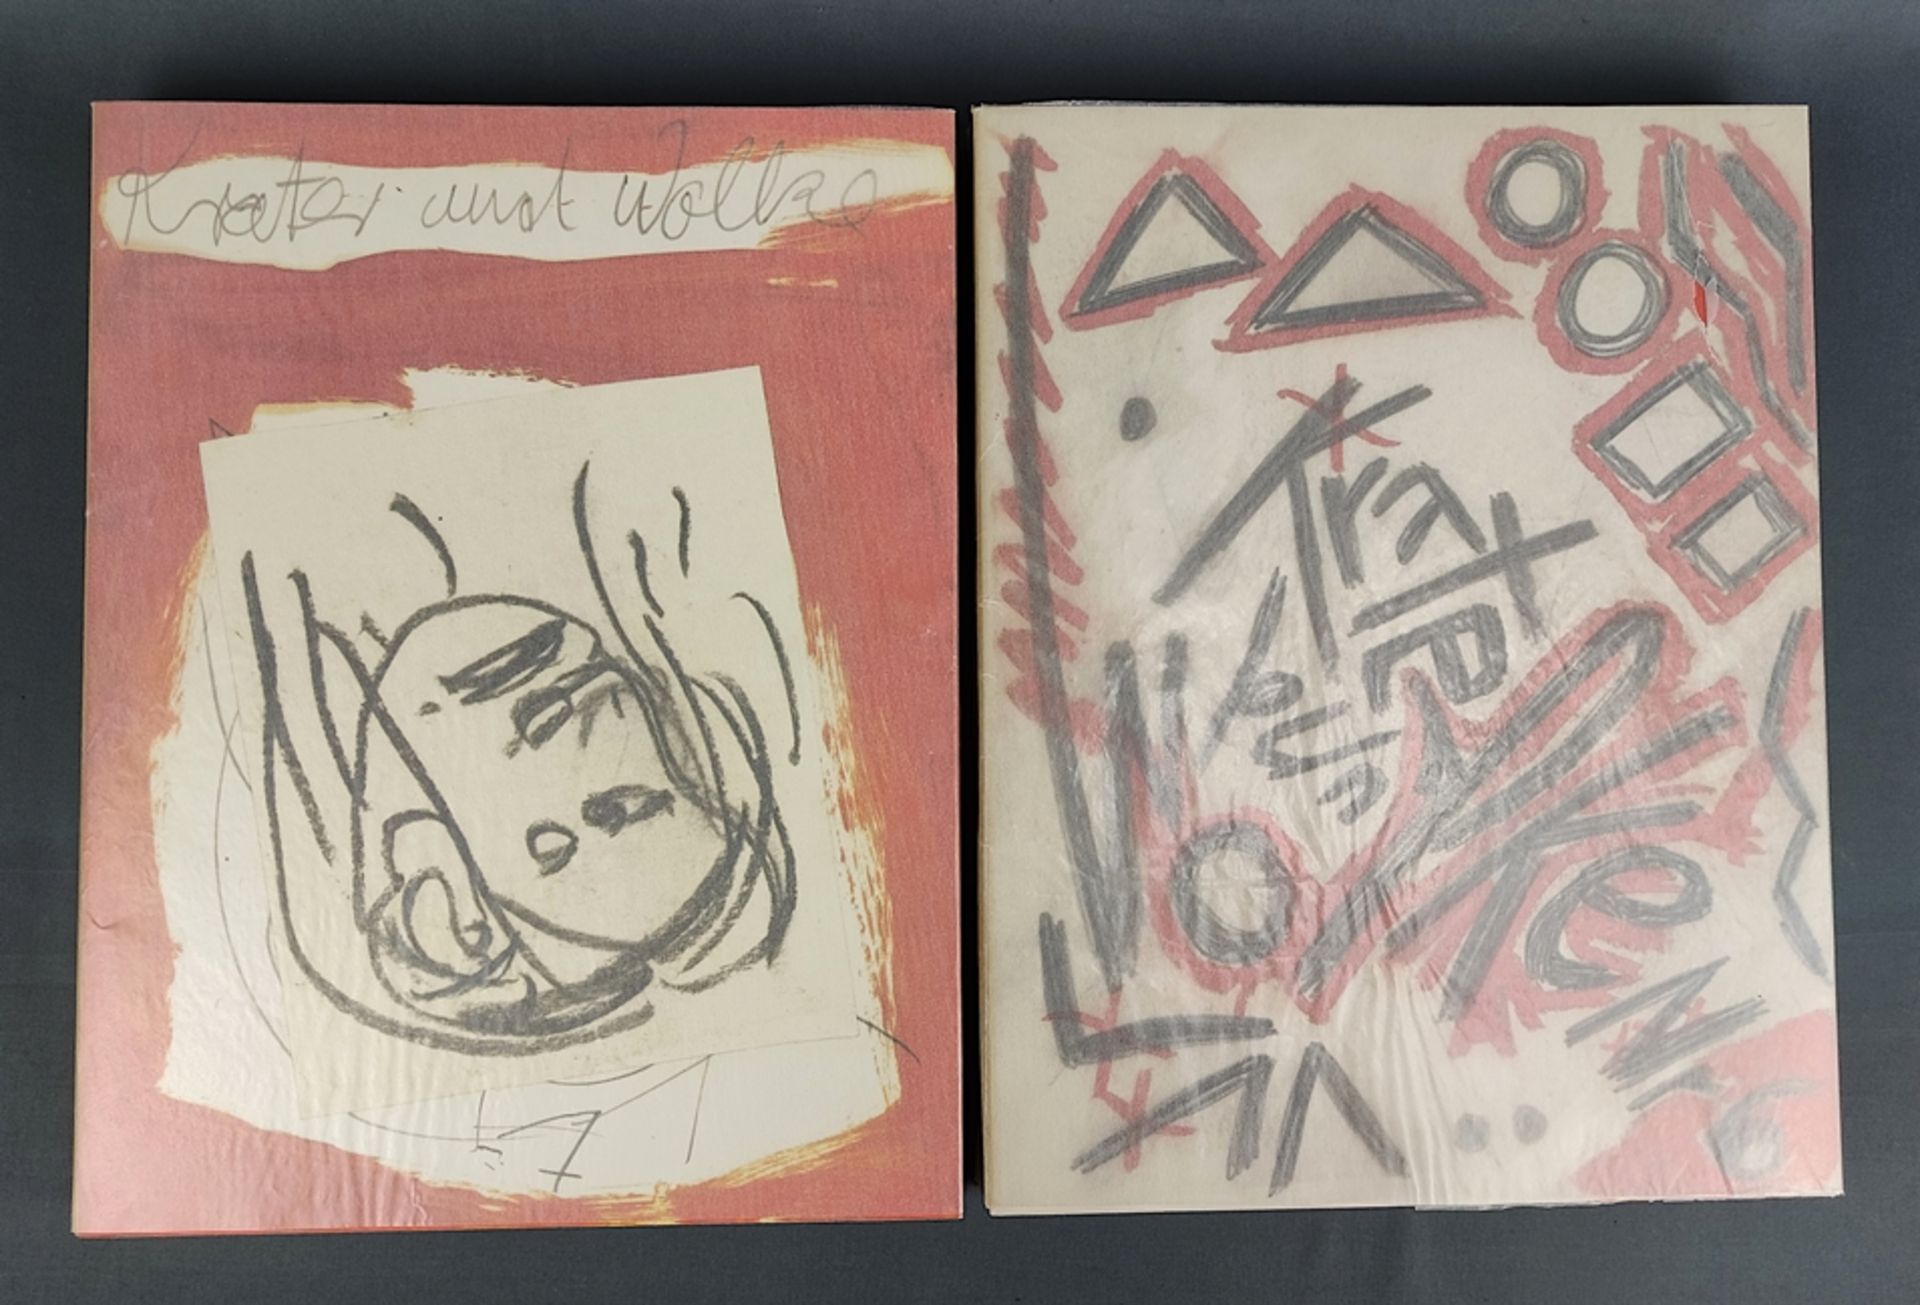 2 volumes "Krater und Wolke", consisting of no. 6 and no. 7, no. 6: Winkler, Ralf (A. R. Penck), ed